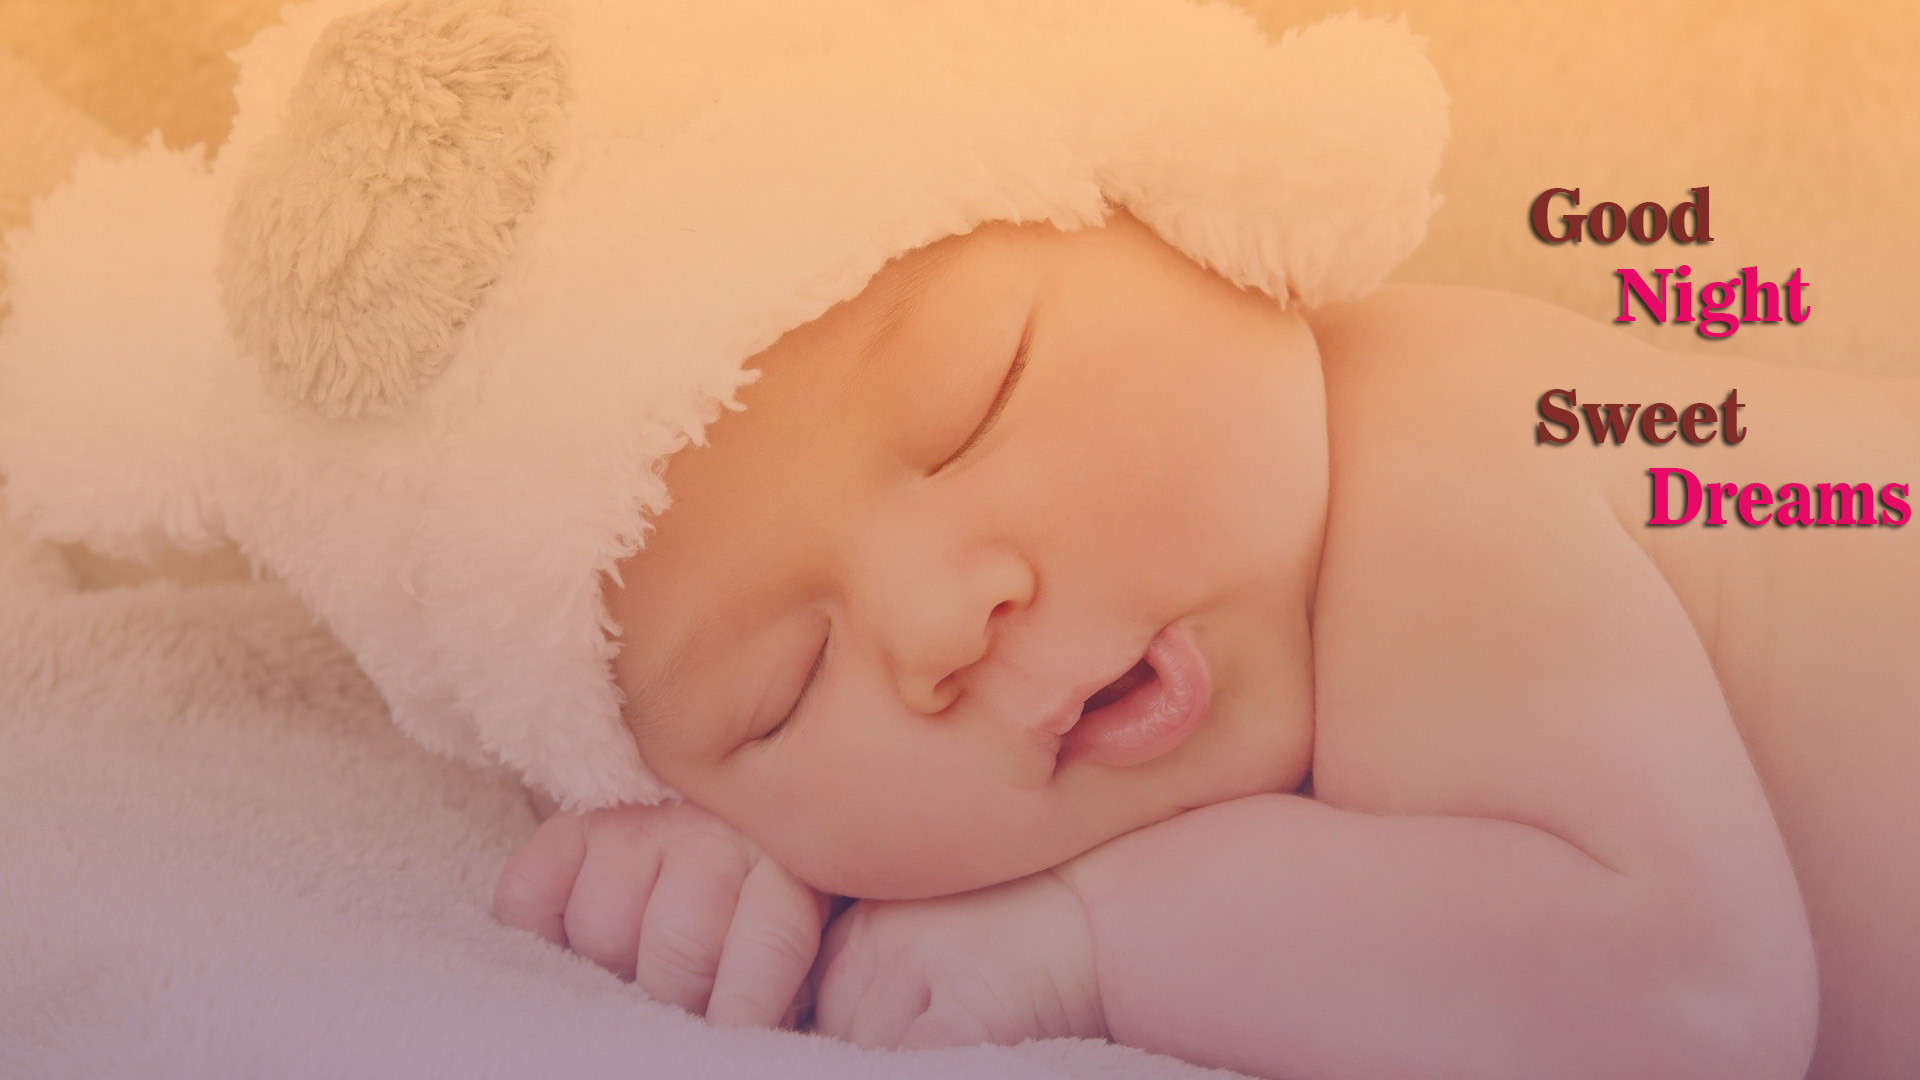 1920x1080 cutie-baby-latest-image-wallpaper-for-good-night-wishes-sweet-dreams